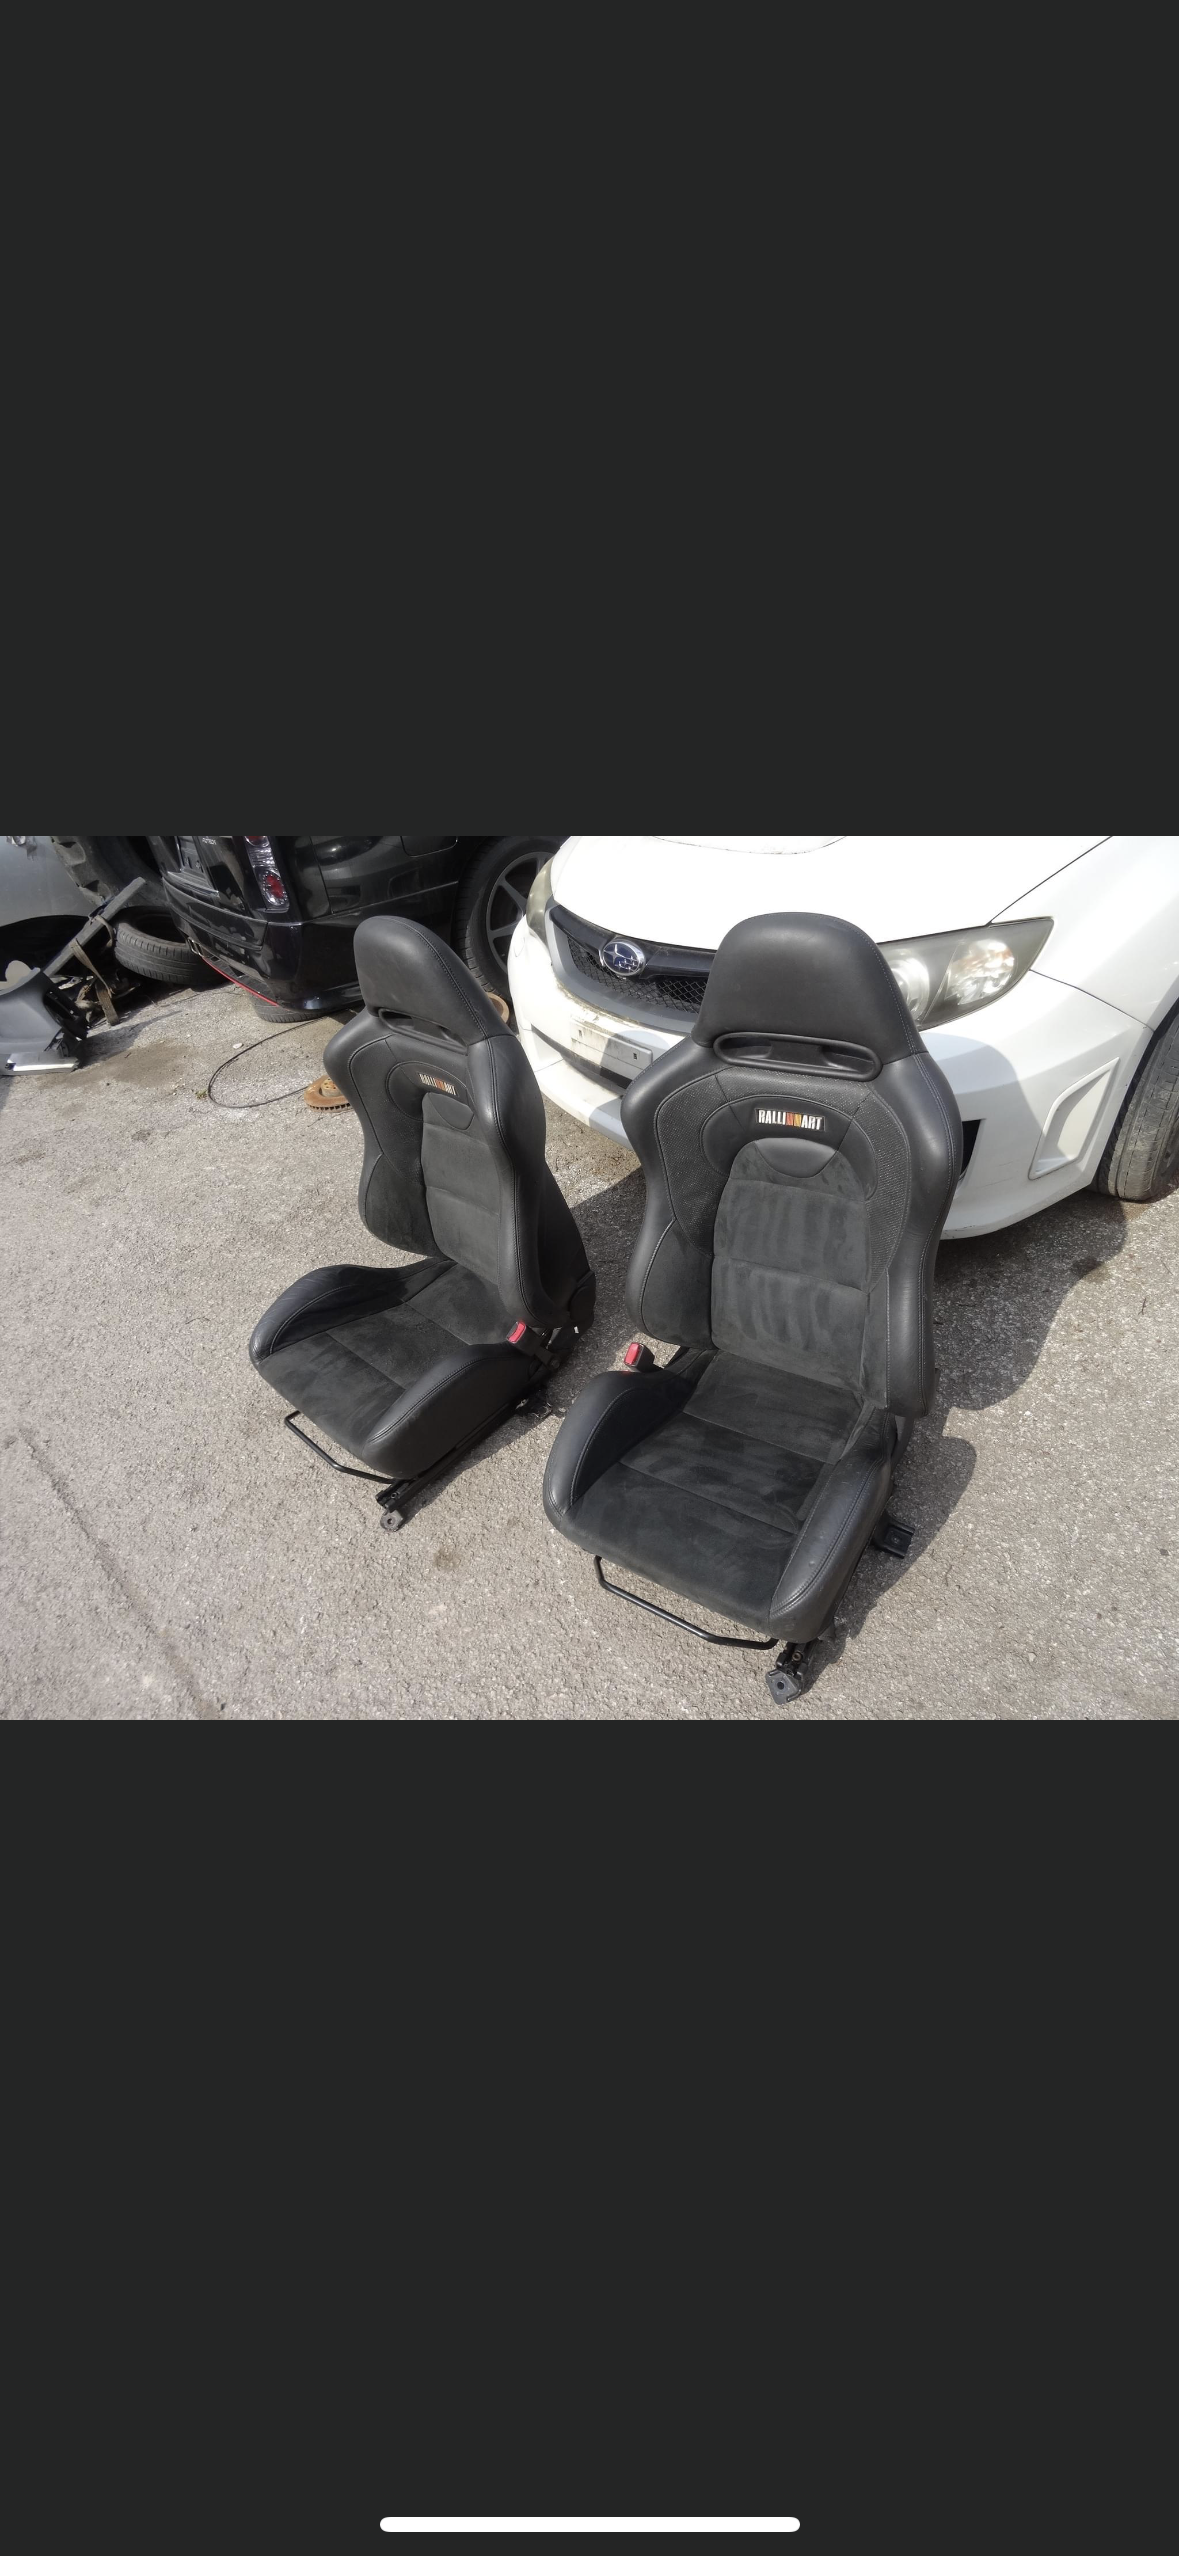 EVO 9 FQ 340 RALLIART FRONT SEATS FOR SALE!